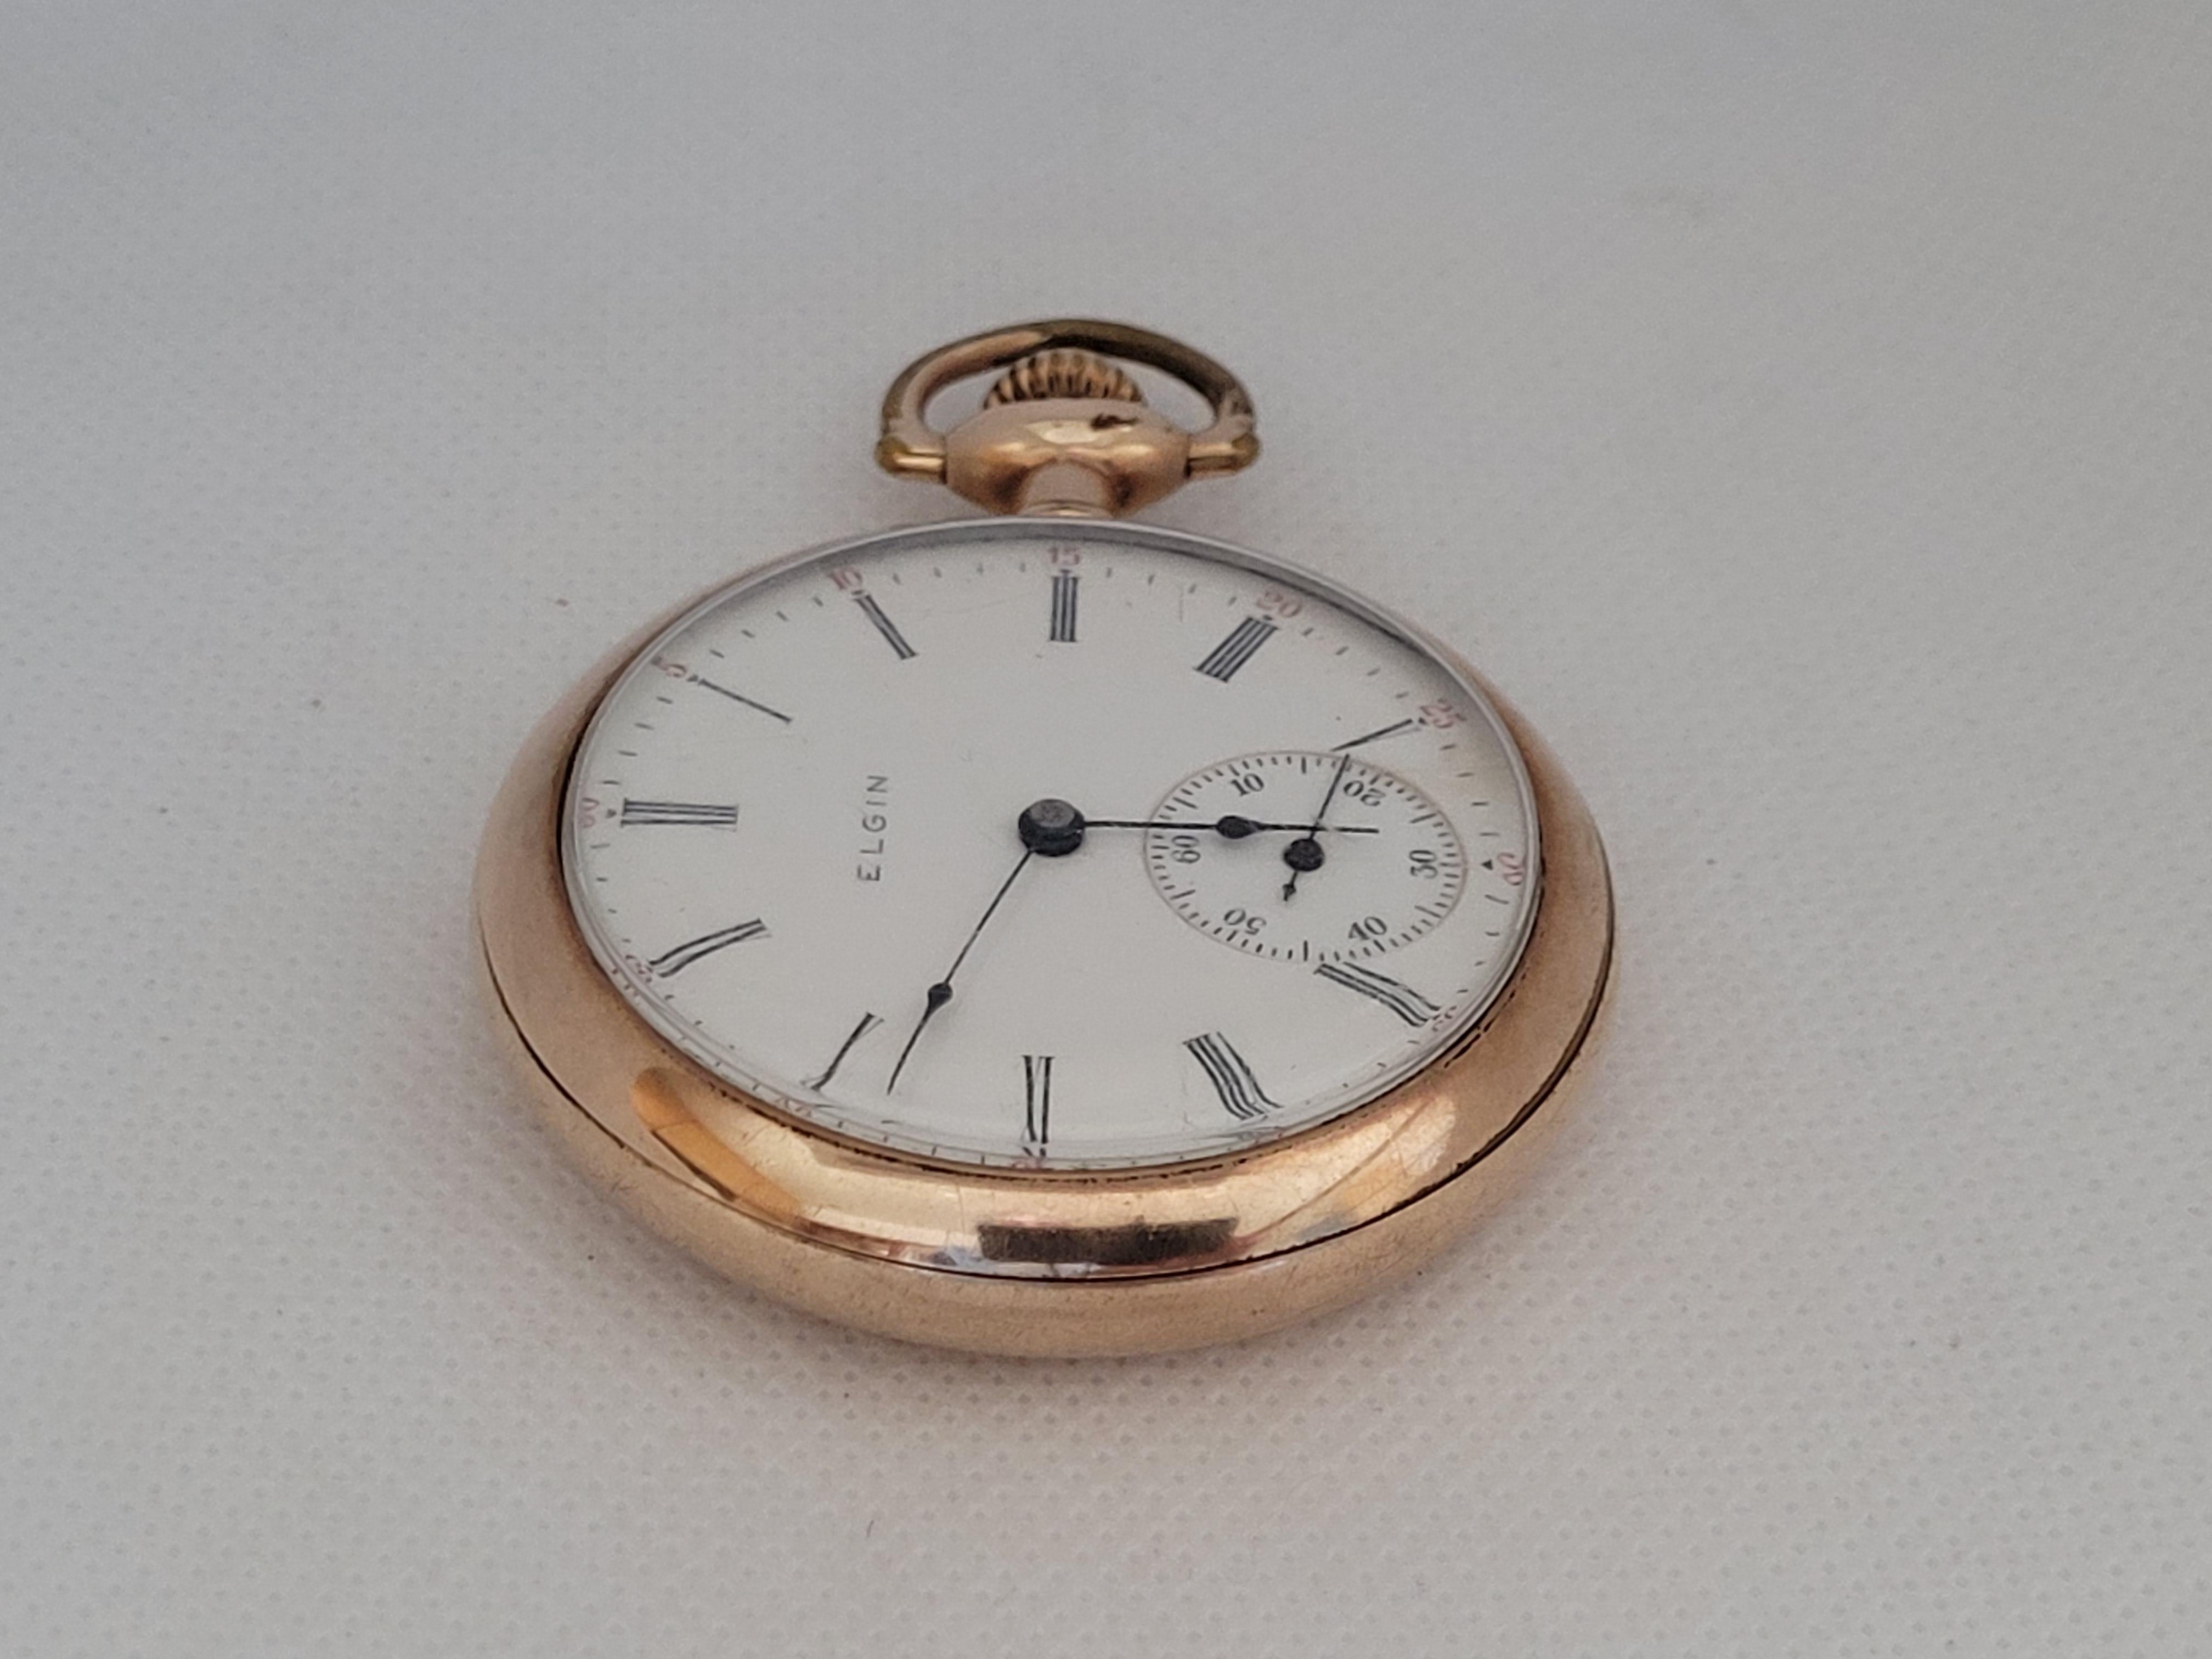 Women's or Men's Elgin Pocket Watch Gold Plated Working 15 Jewels 11066484 Year 1905 For Sale